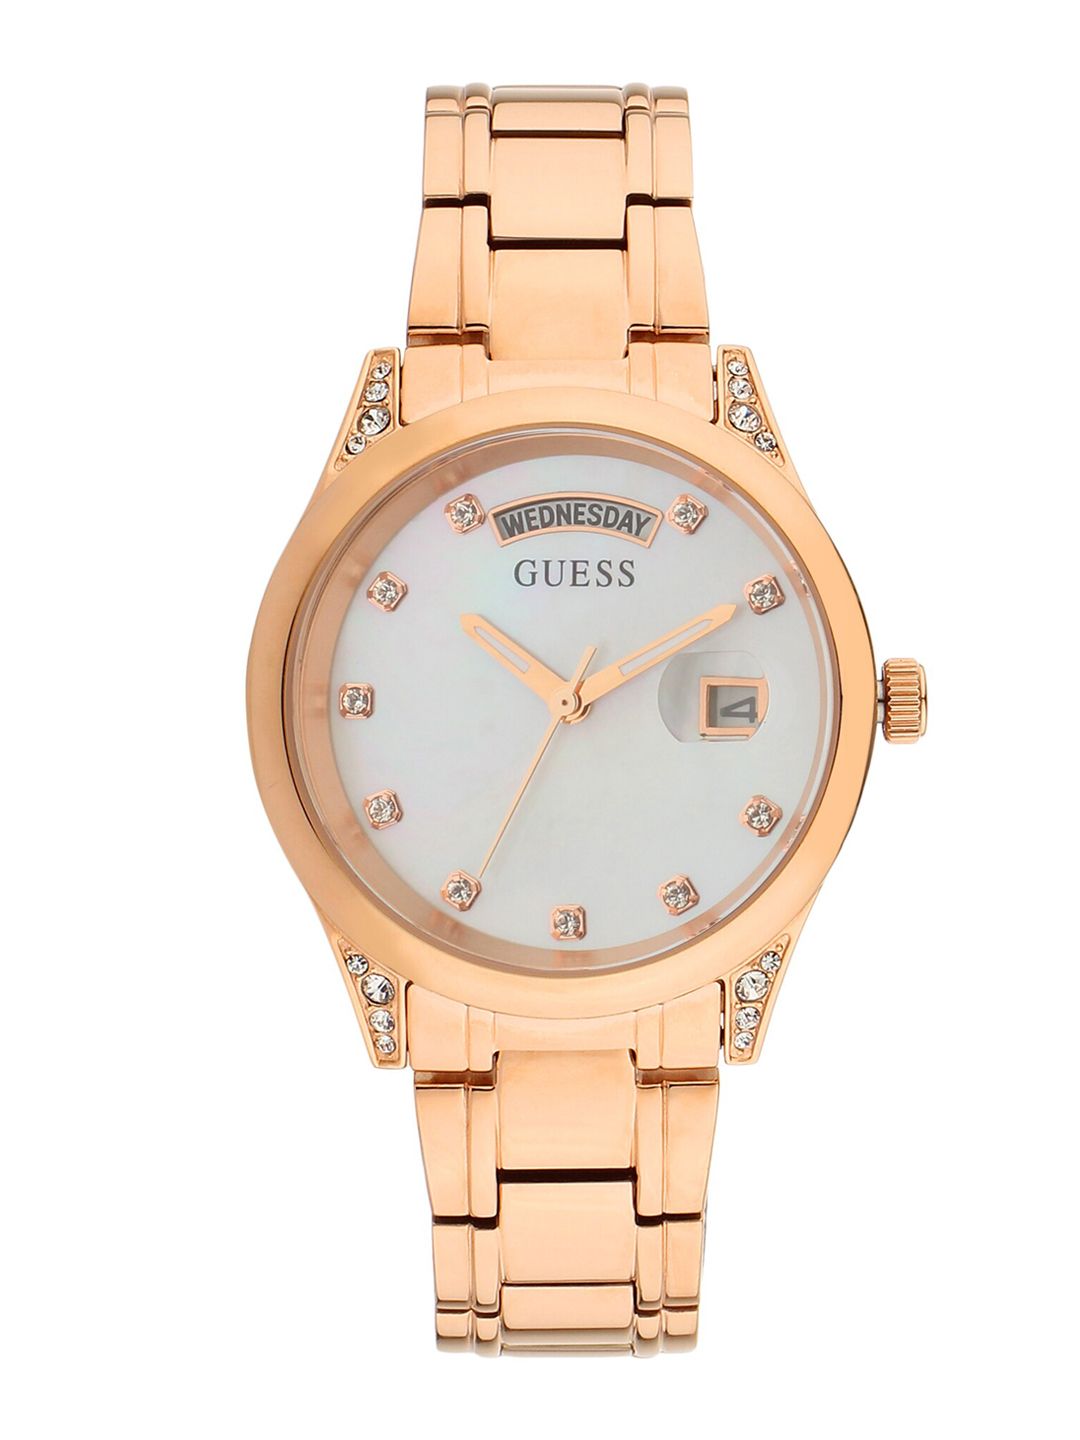 GUESS  Analogue Women Rose Gold-Toned Embellished Dial With Bracelet Style Strap Watch Price in India